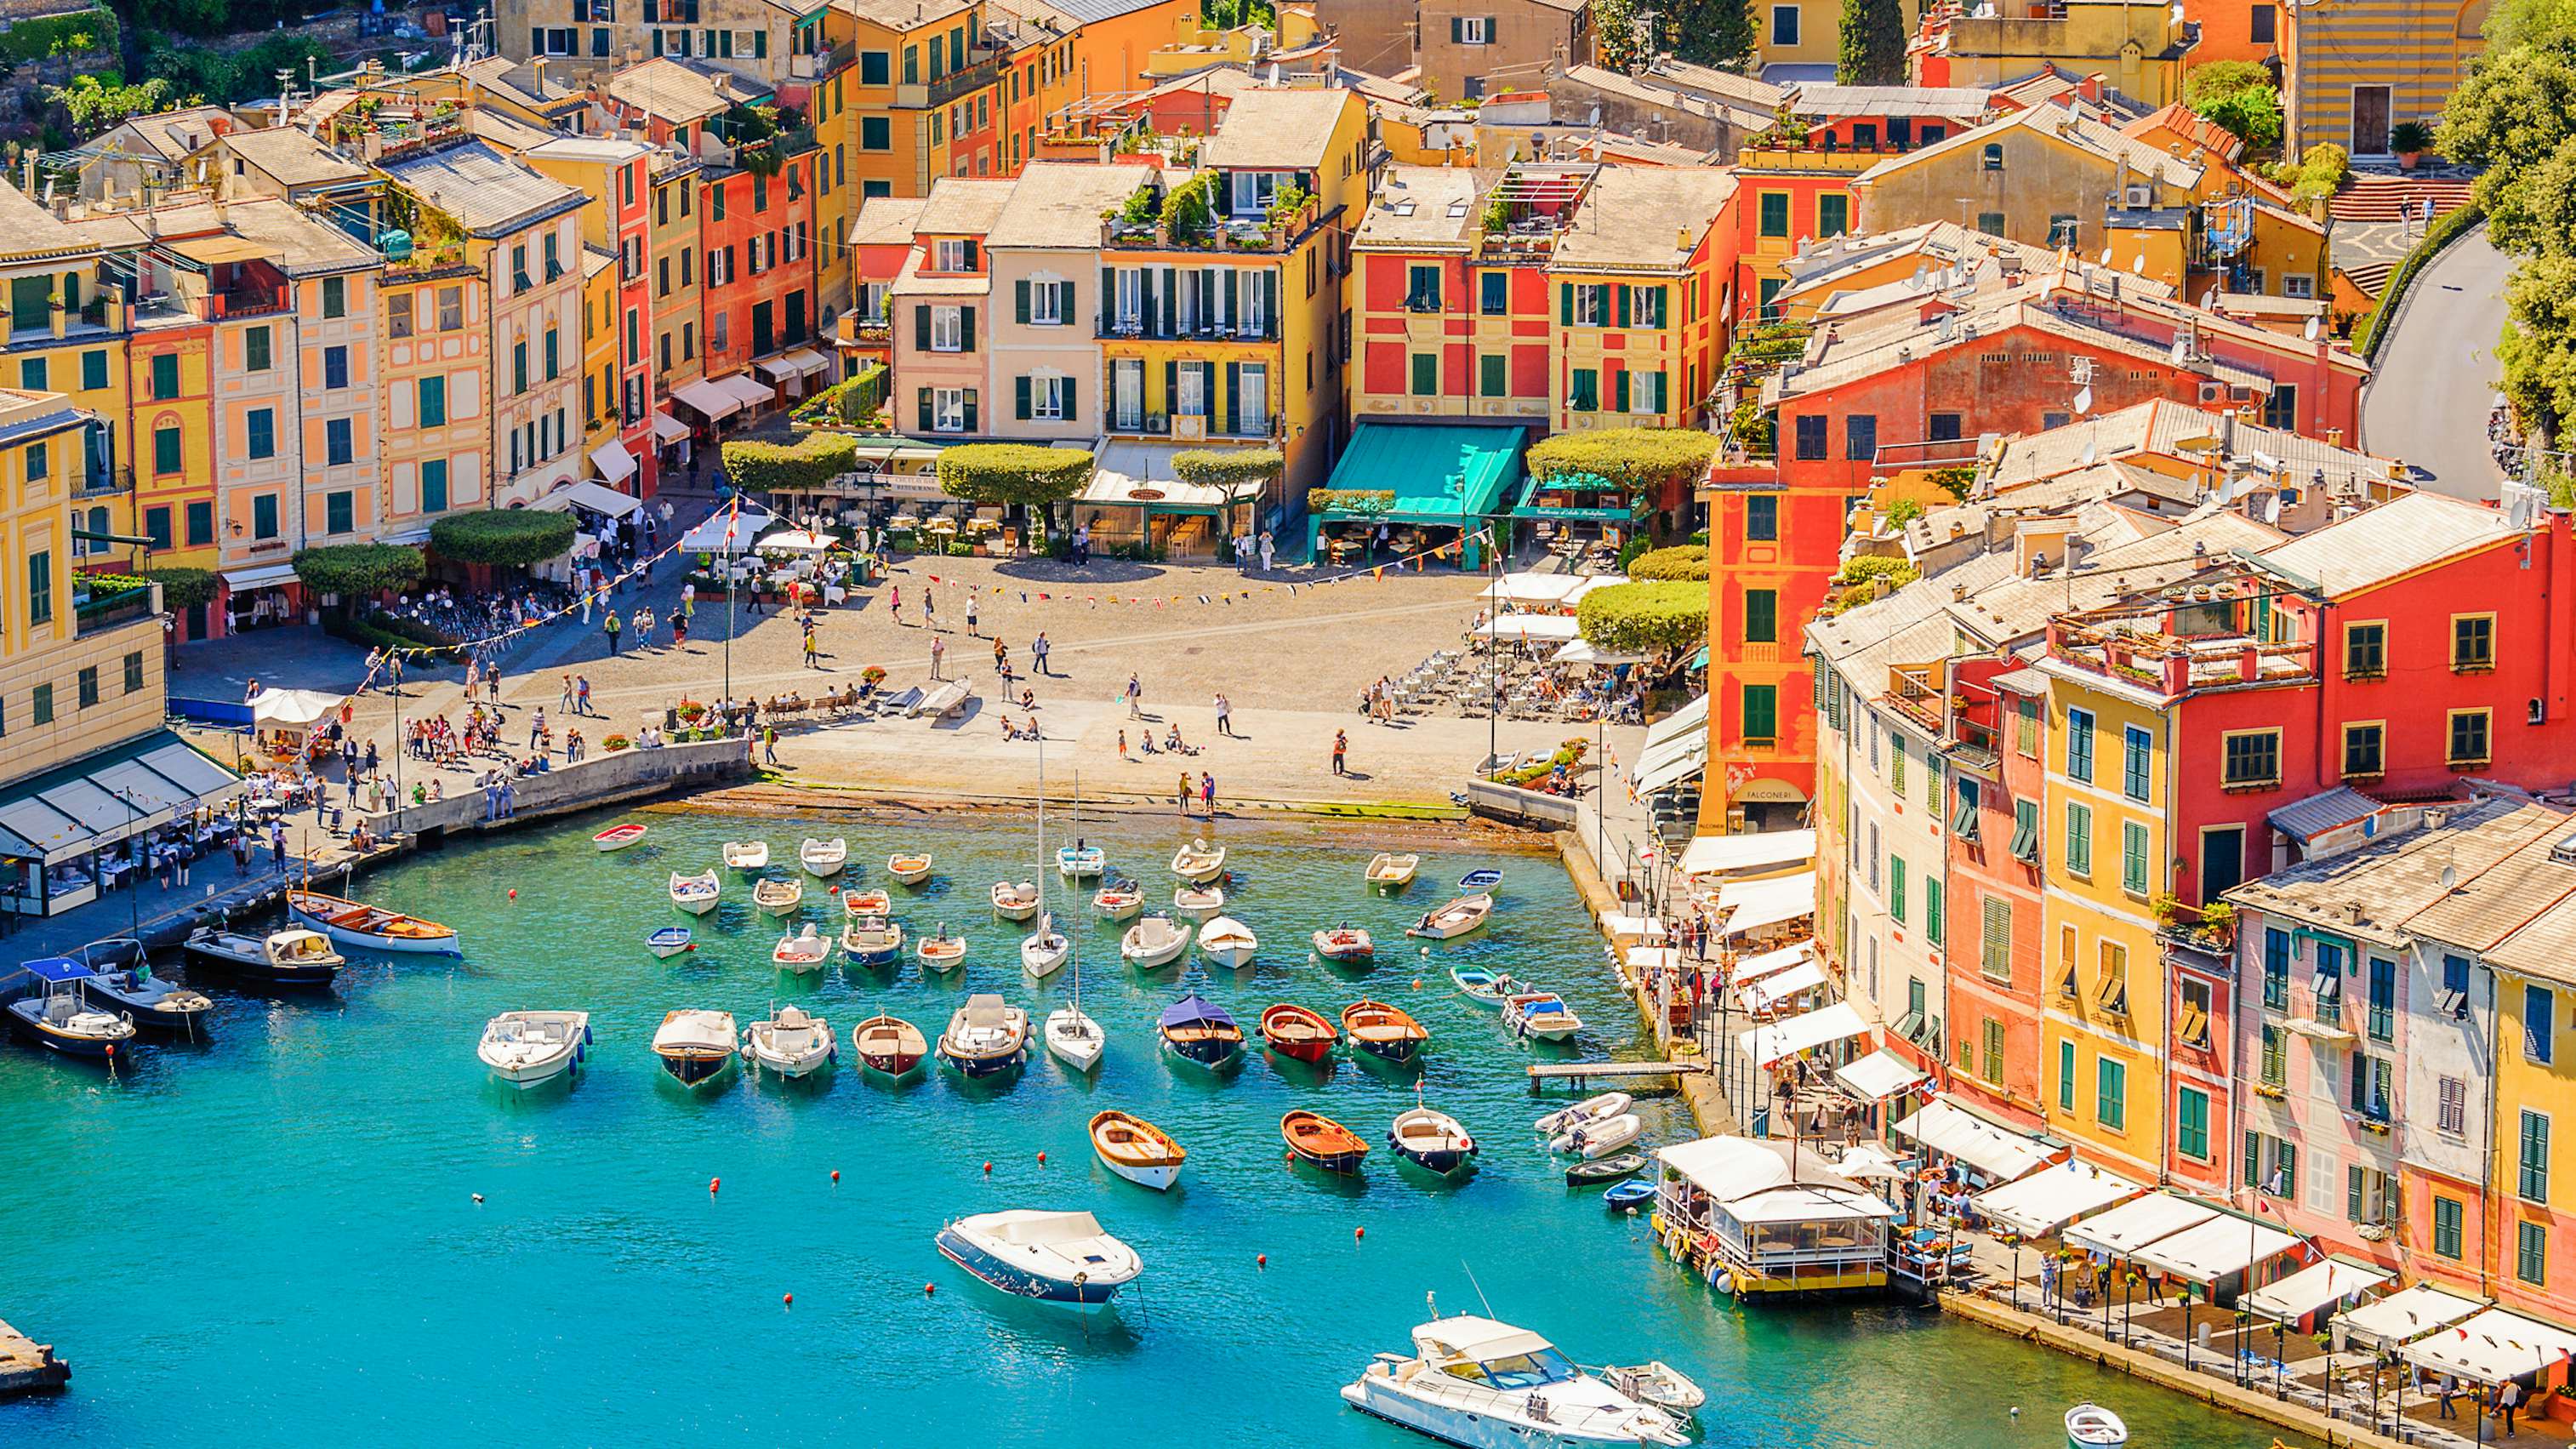 Portofino Yacht Charter - Portofino, an Italian fishing village, Genoa province, Italy. A vacation resort with a picturesque harbour and with celebrity and artistic visitors.